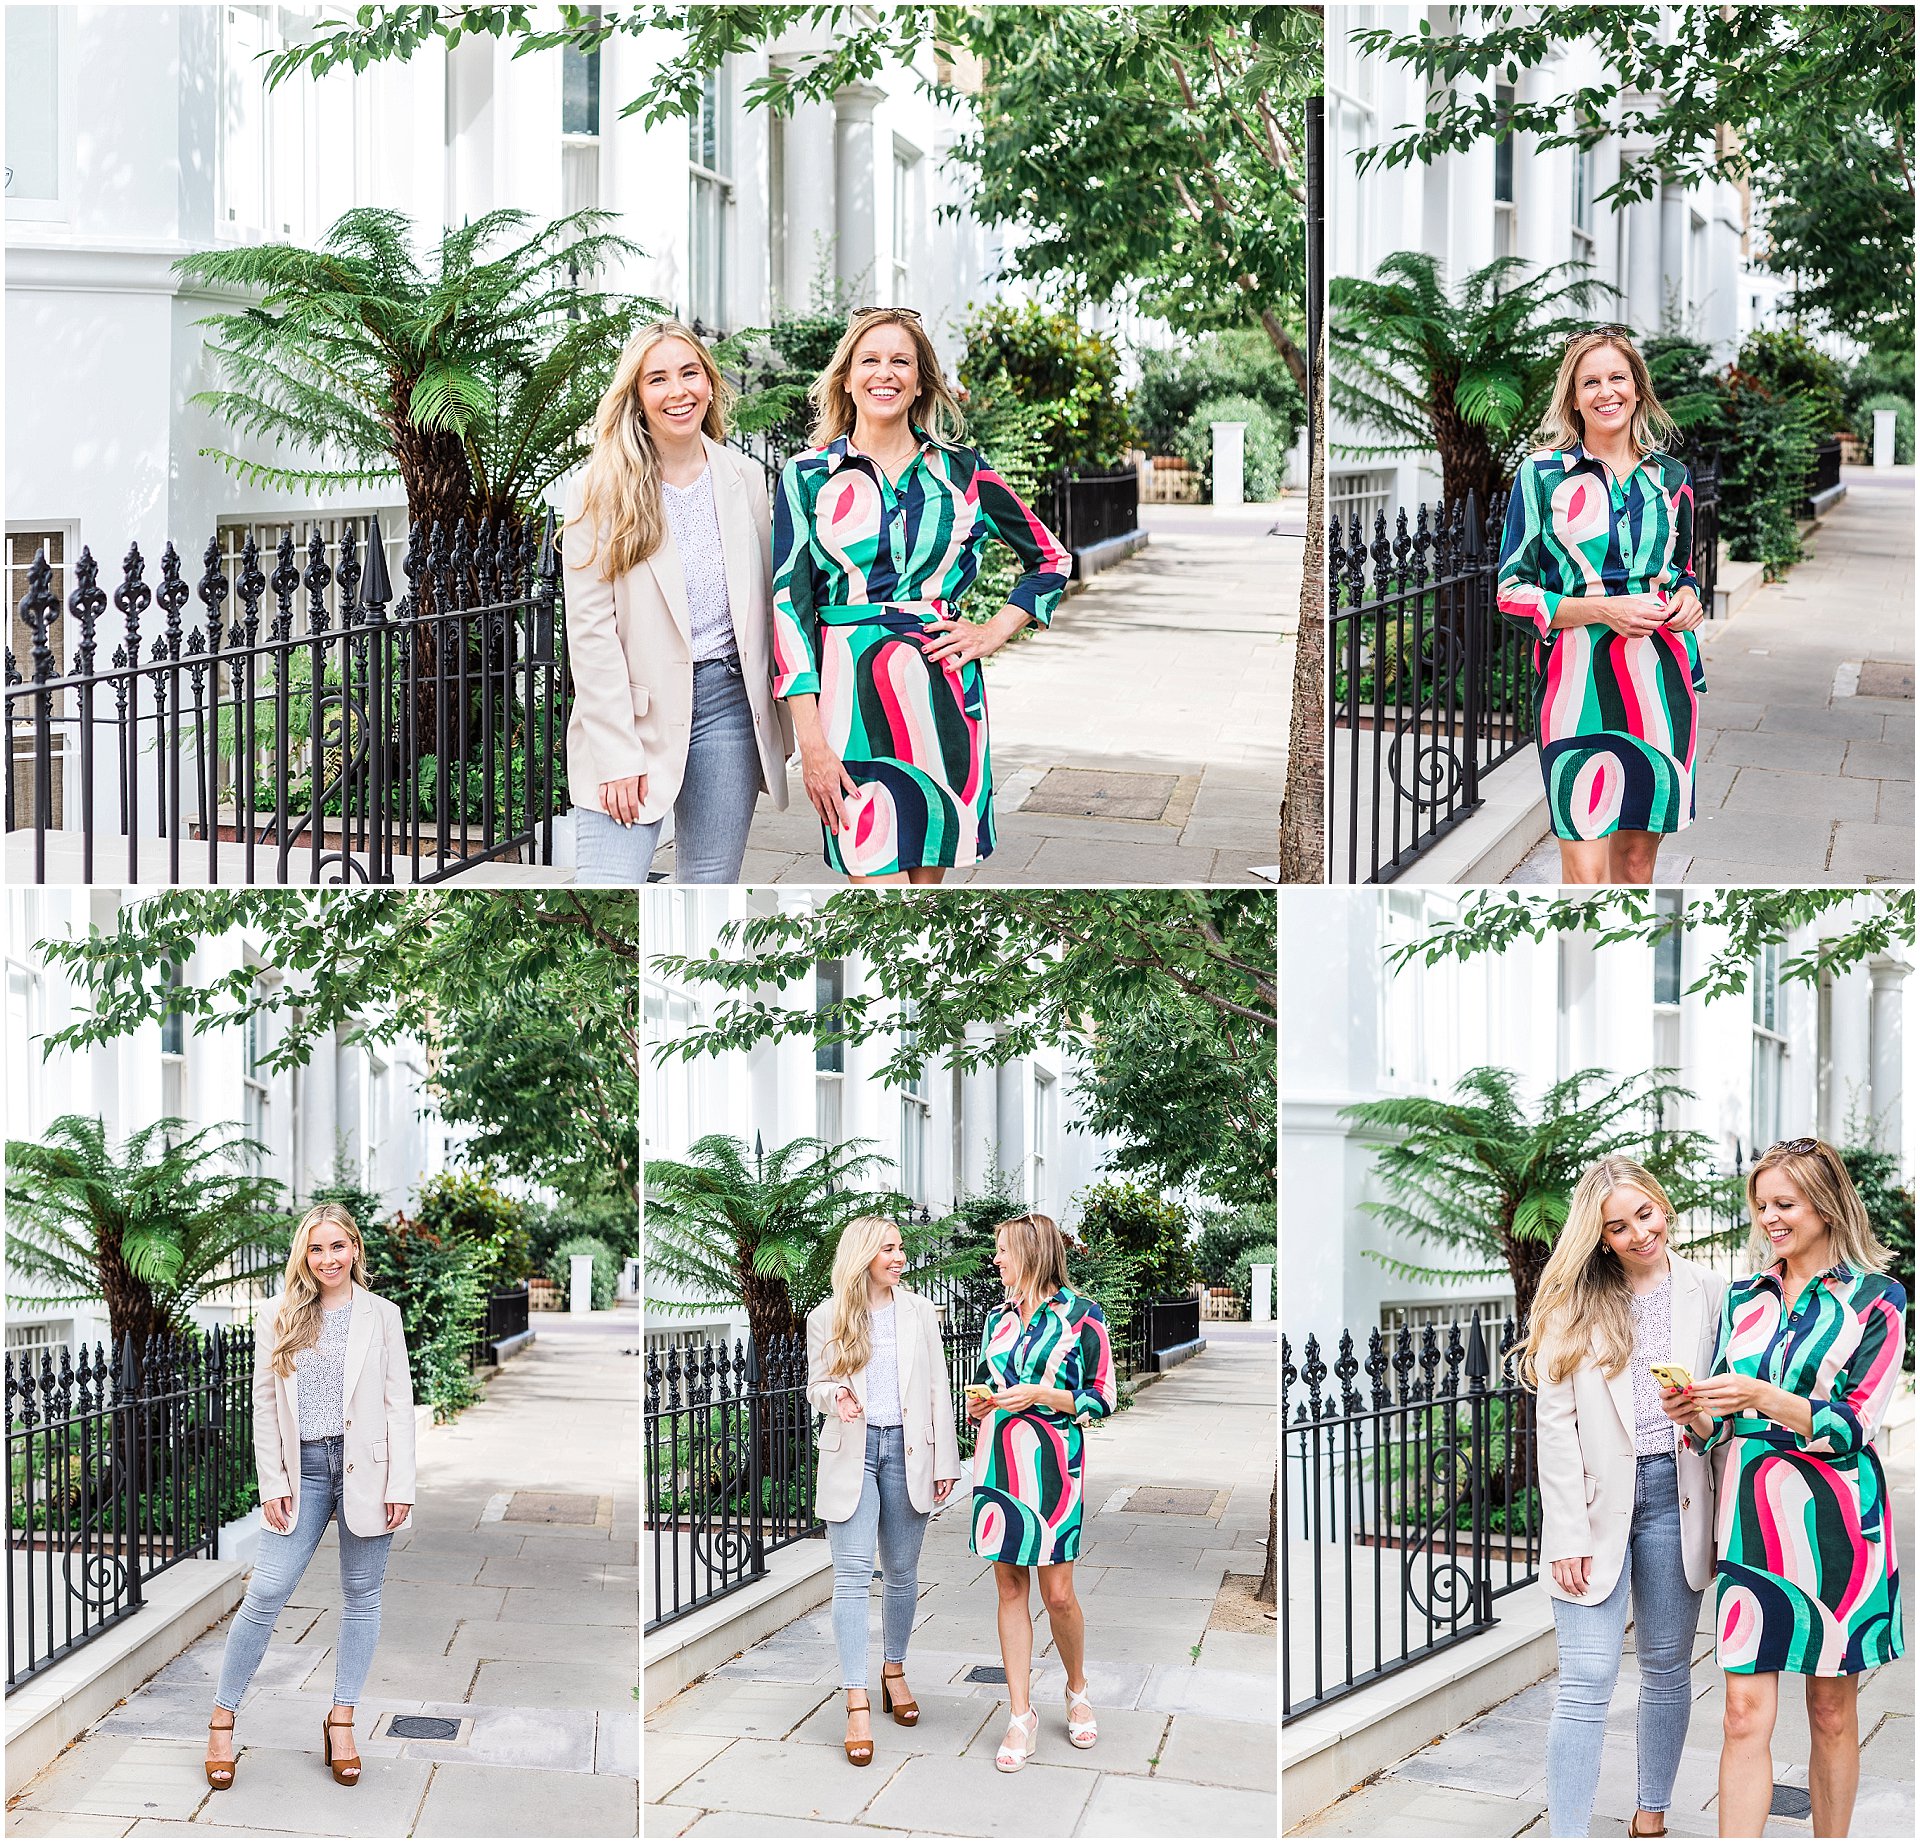 Images of PR Agency partners Carol and Tiffany on their London brand shoot